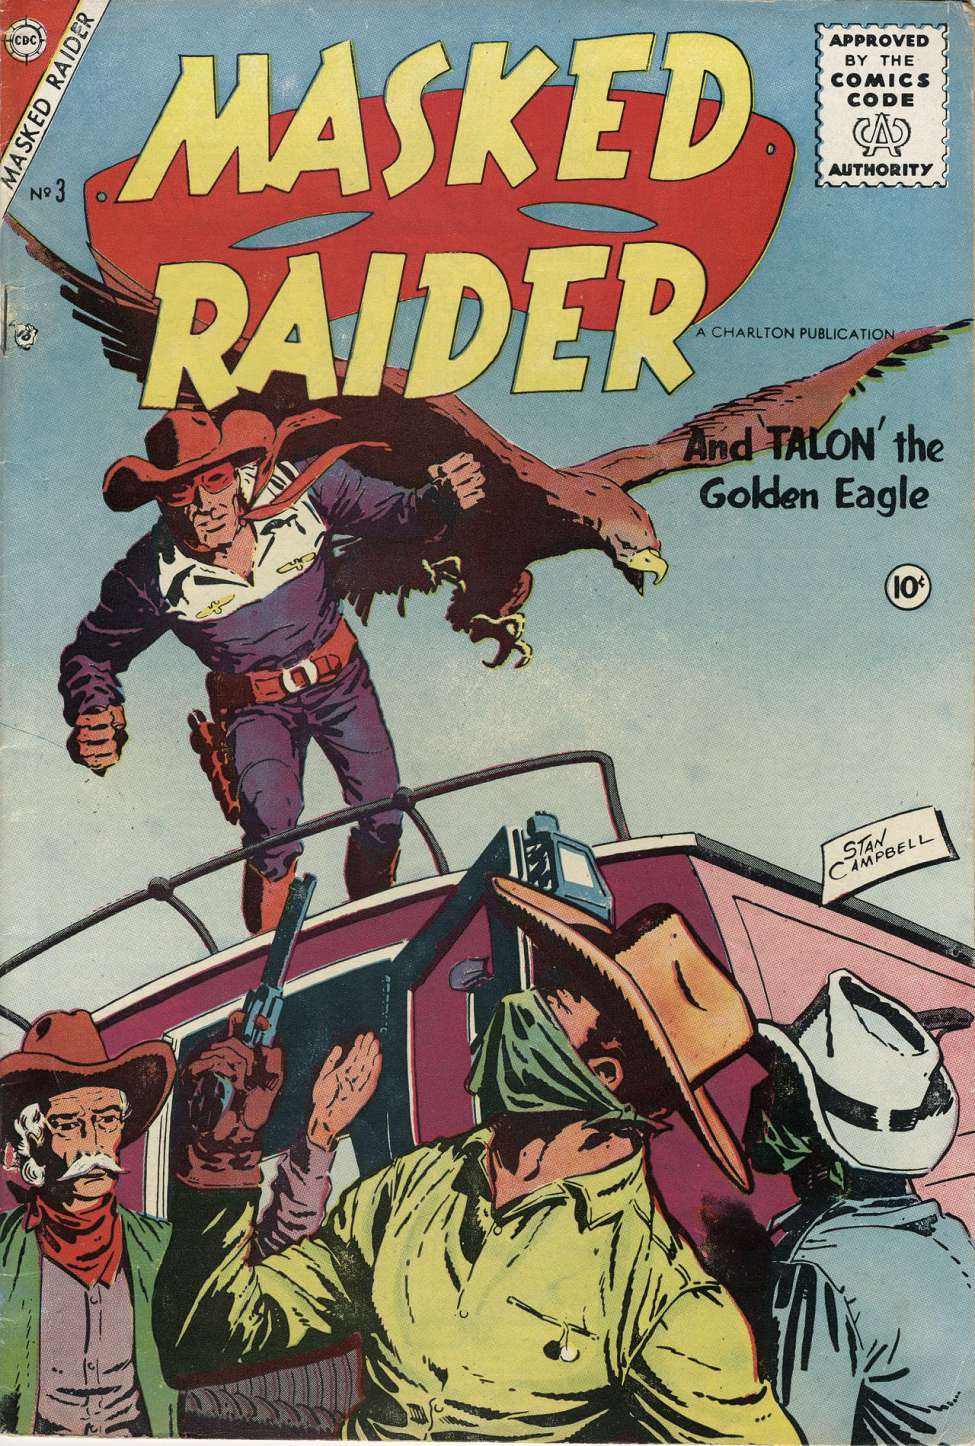 Book Cover For Masked Raider 3 - Version 2